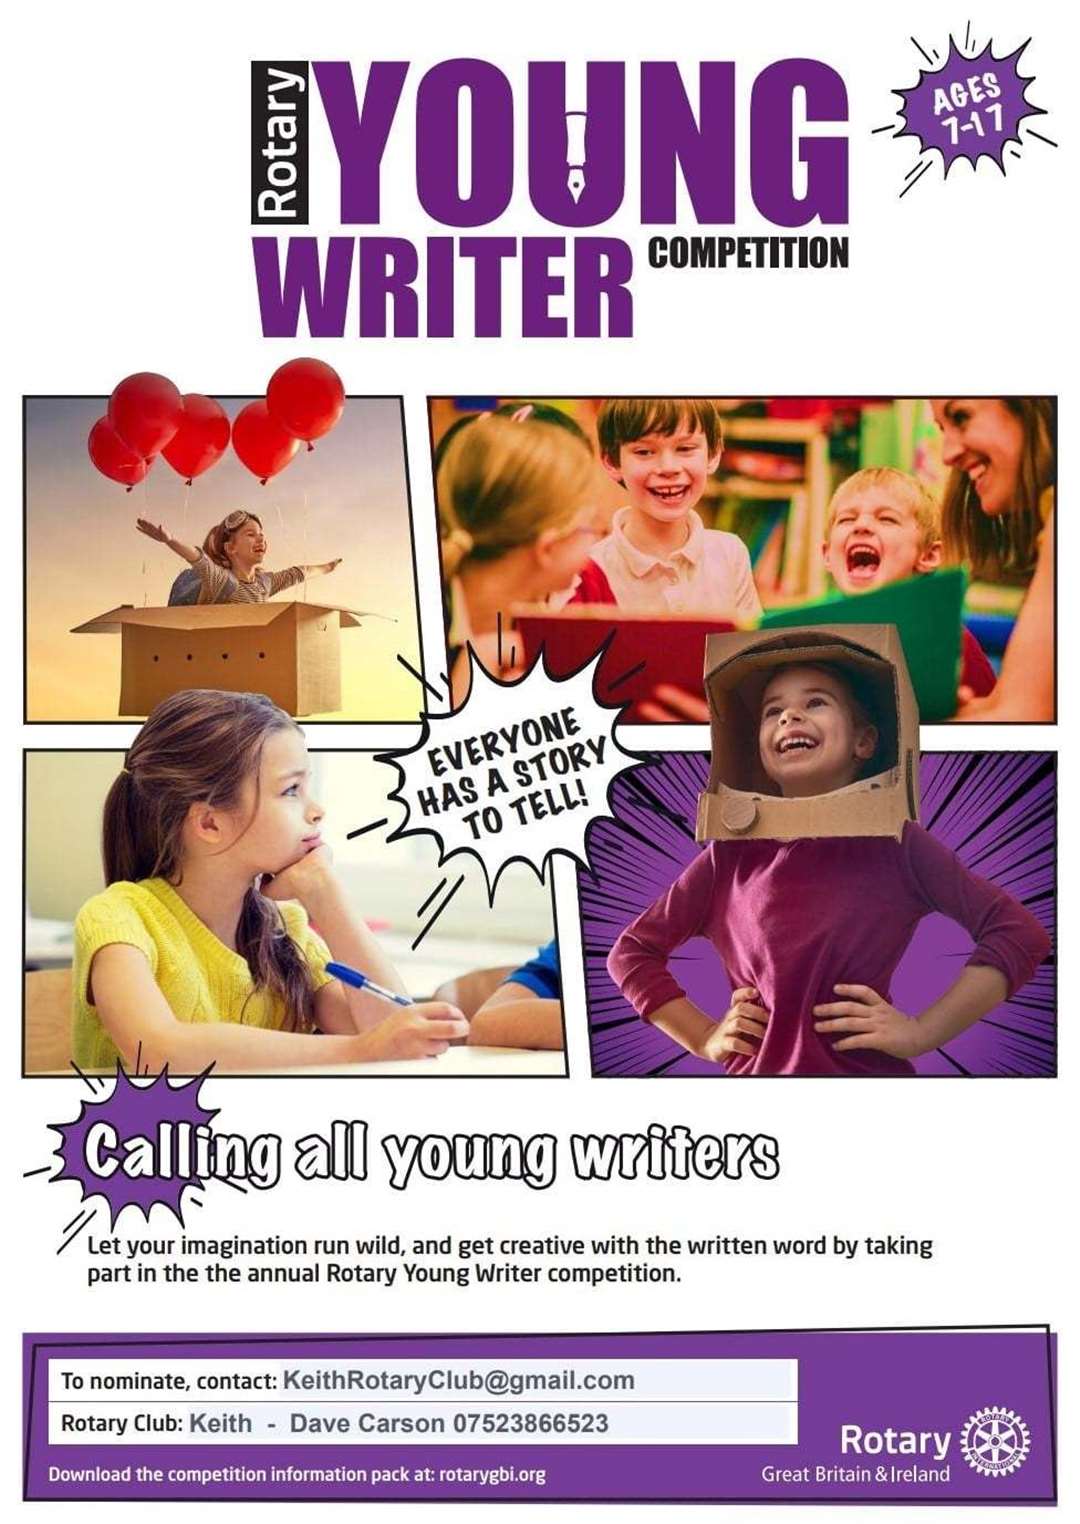 The young writer's competition.